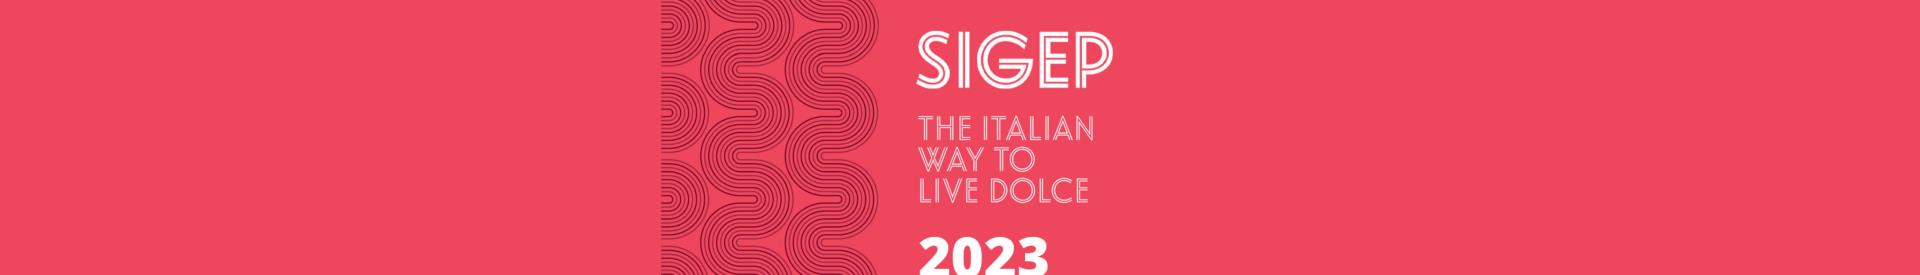 sigep 2023